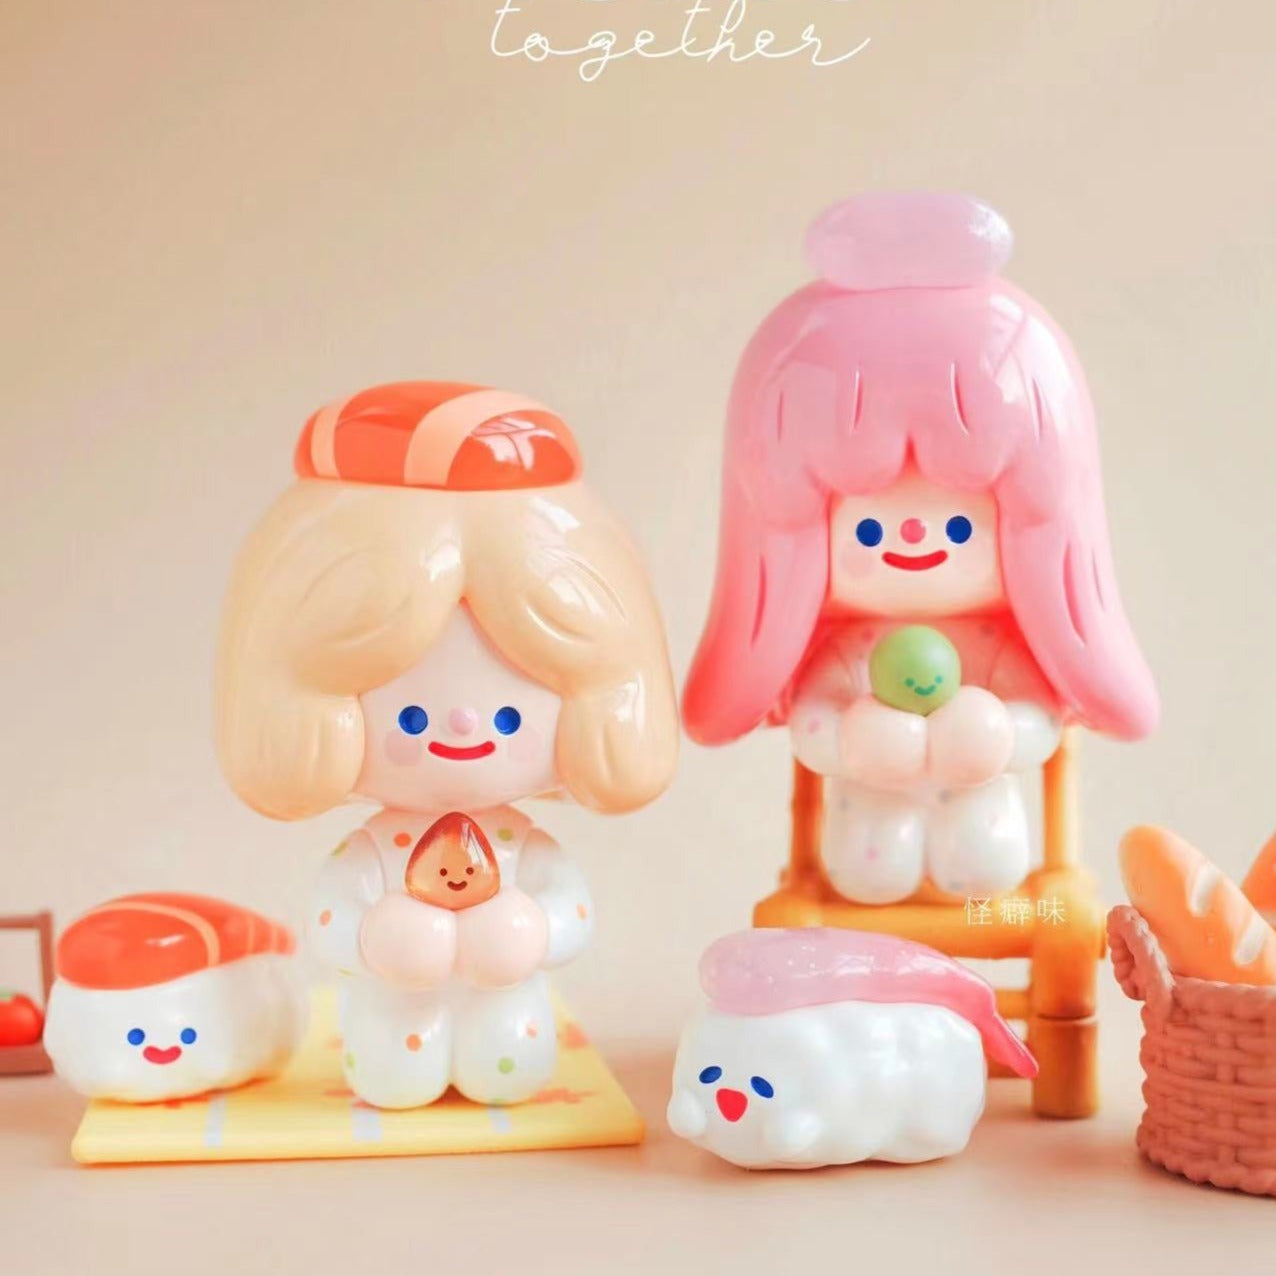 Rico happy picnic together series blind-box figures toy